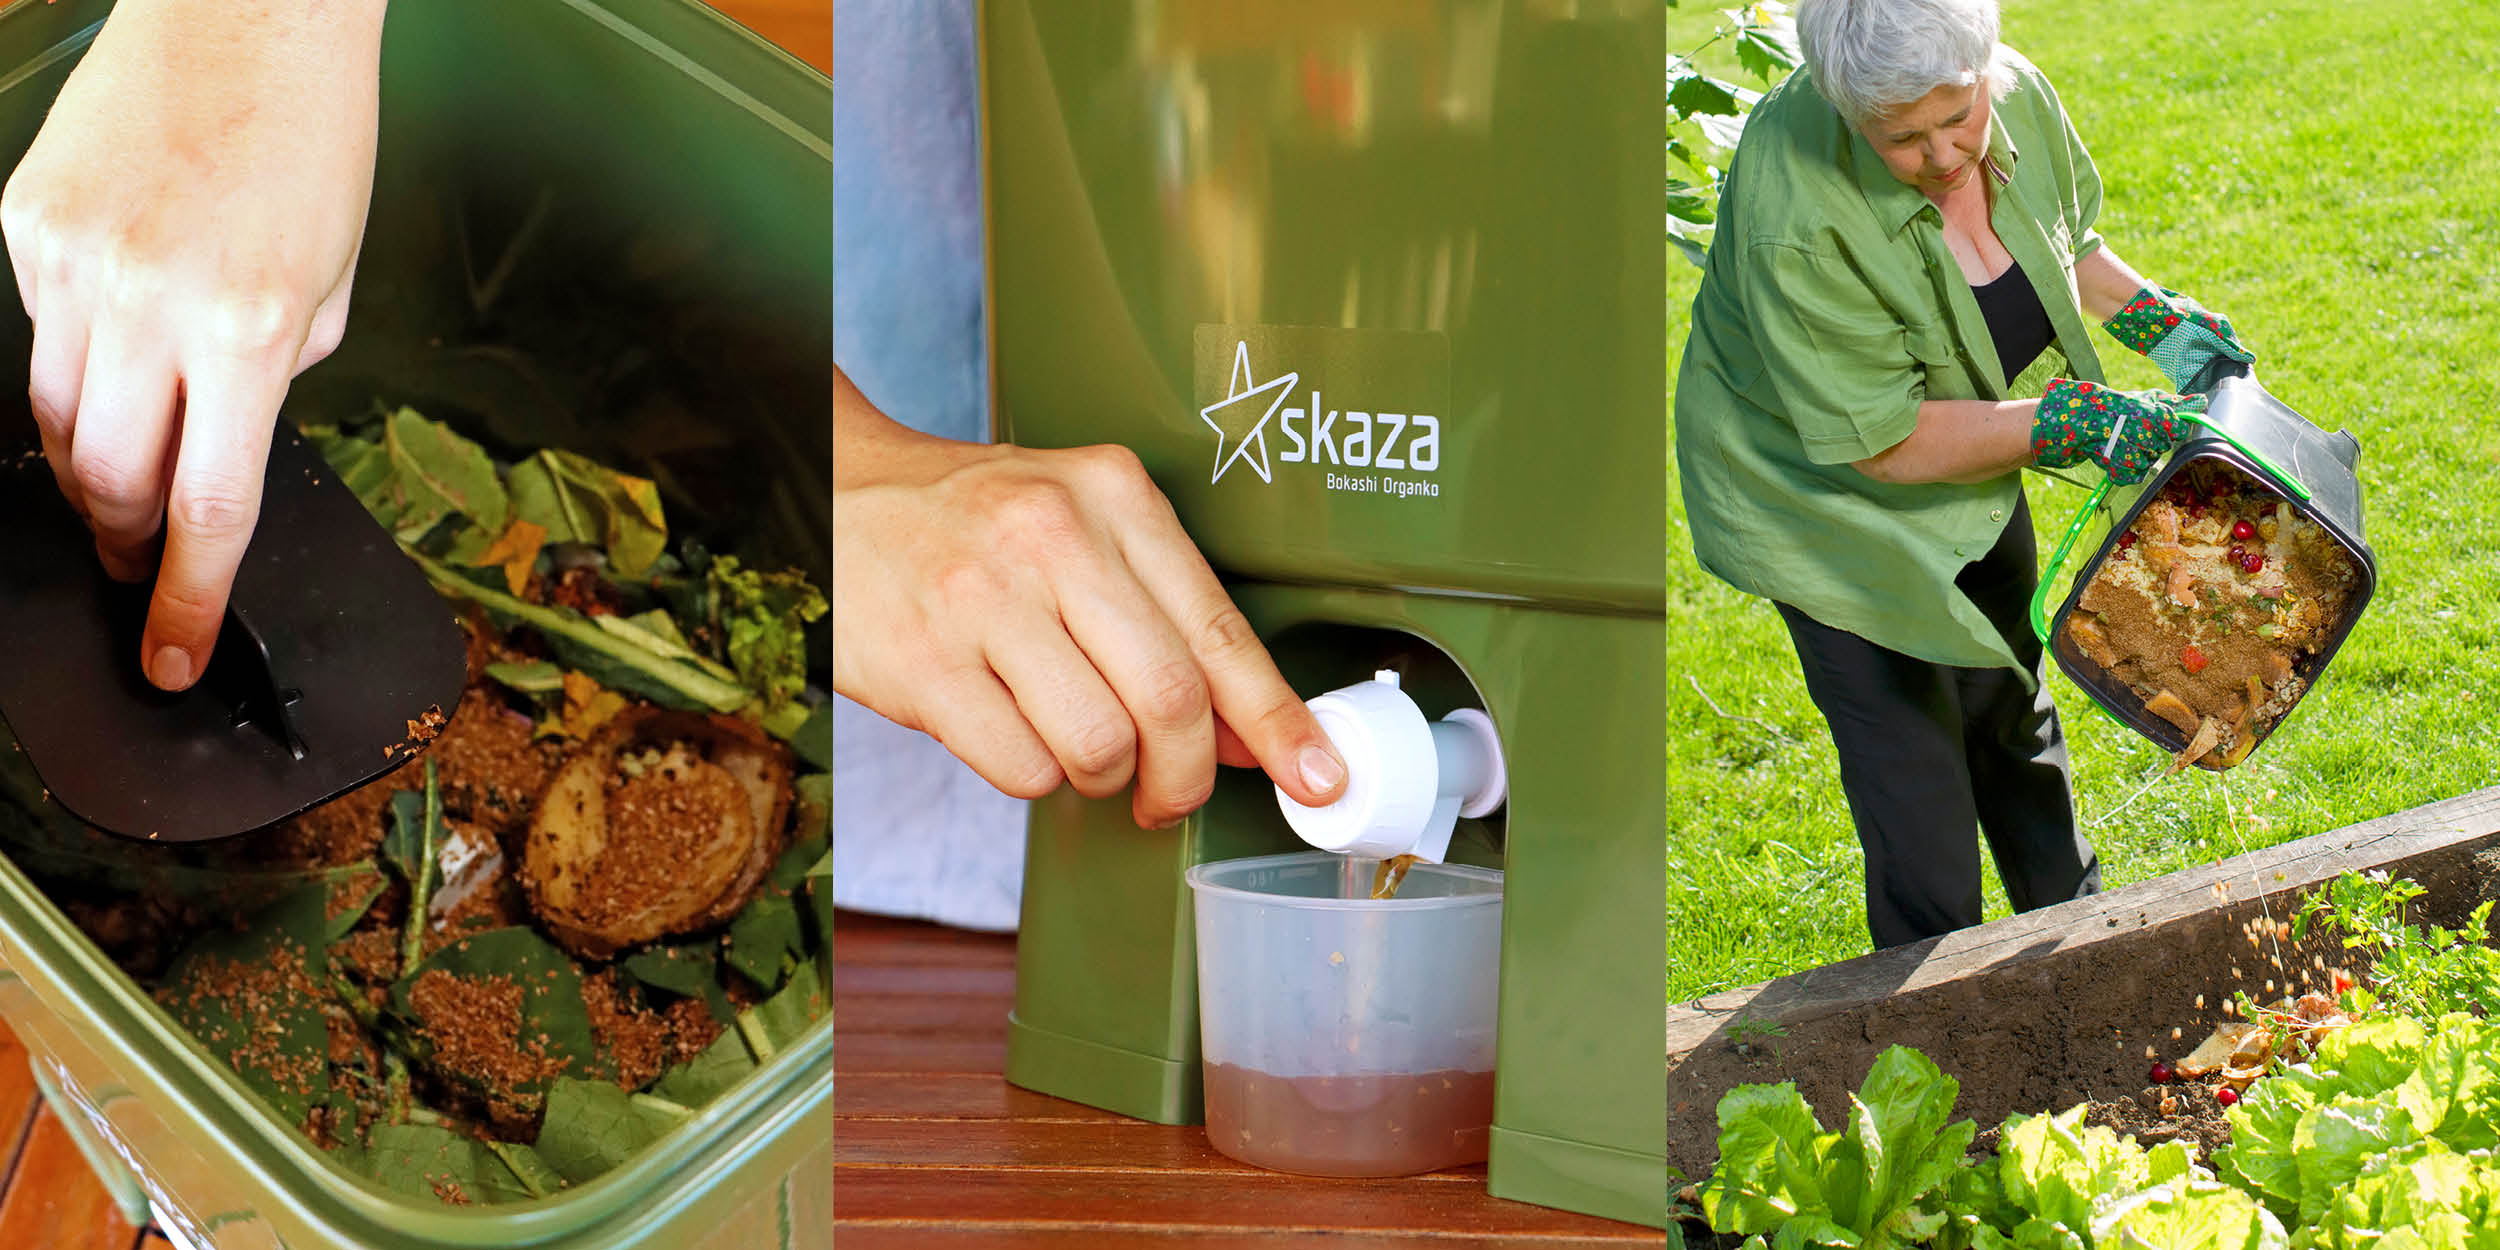 Another great example is the story of our Bokashi Organko composters